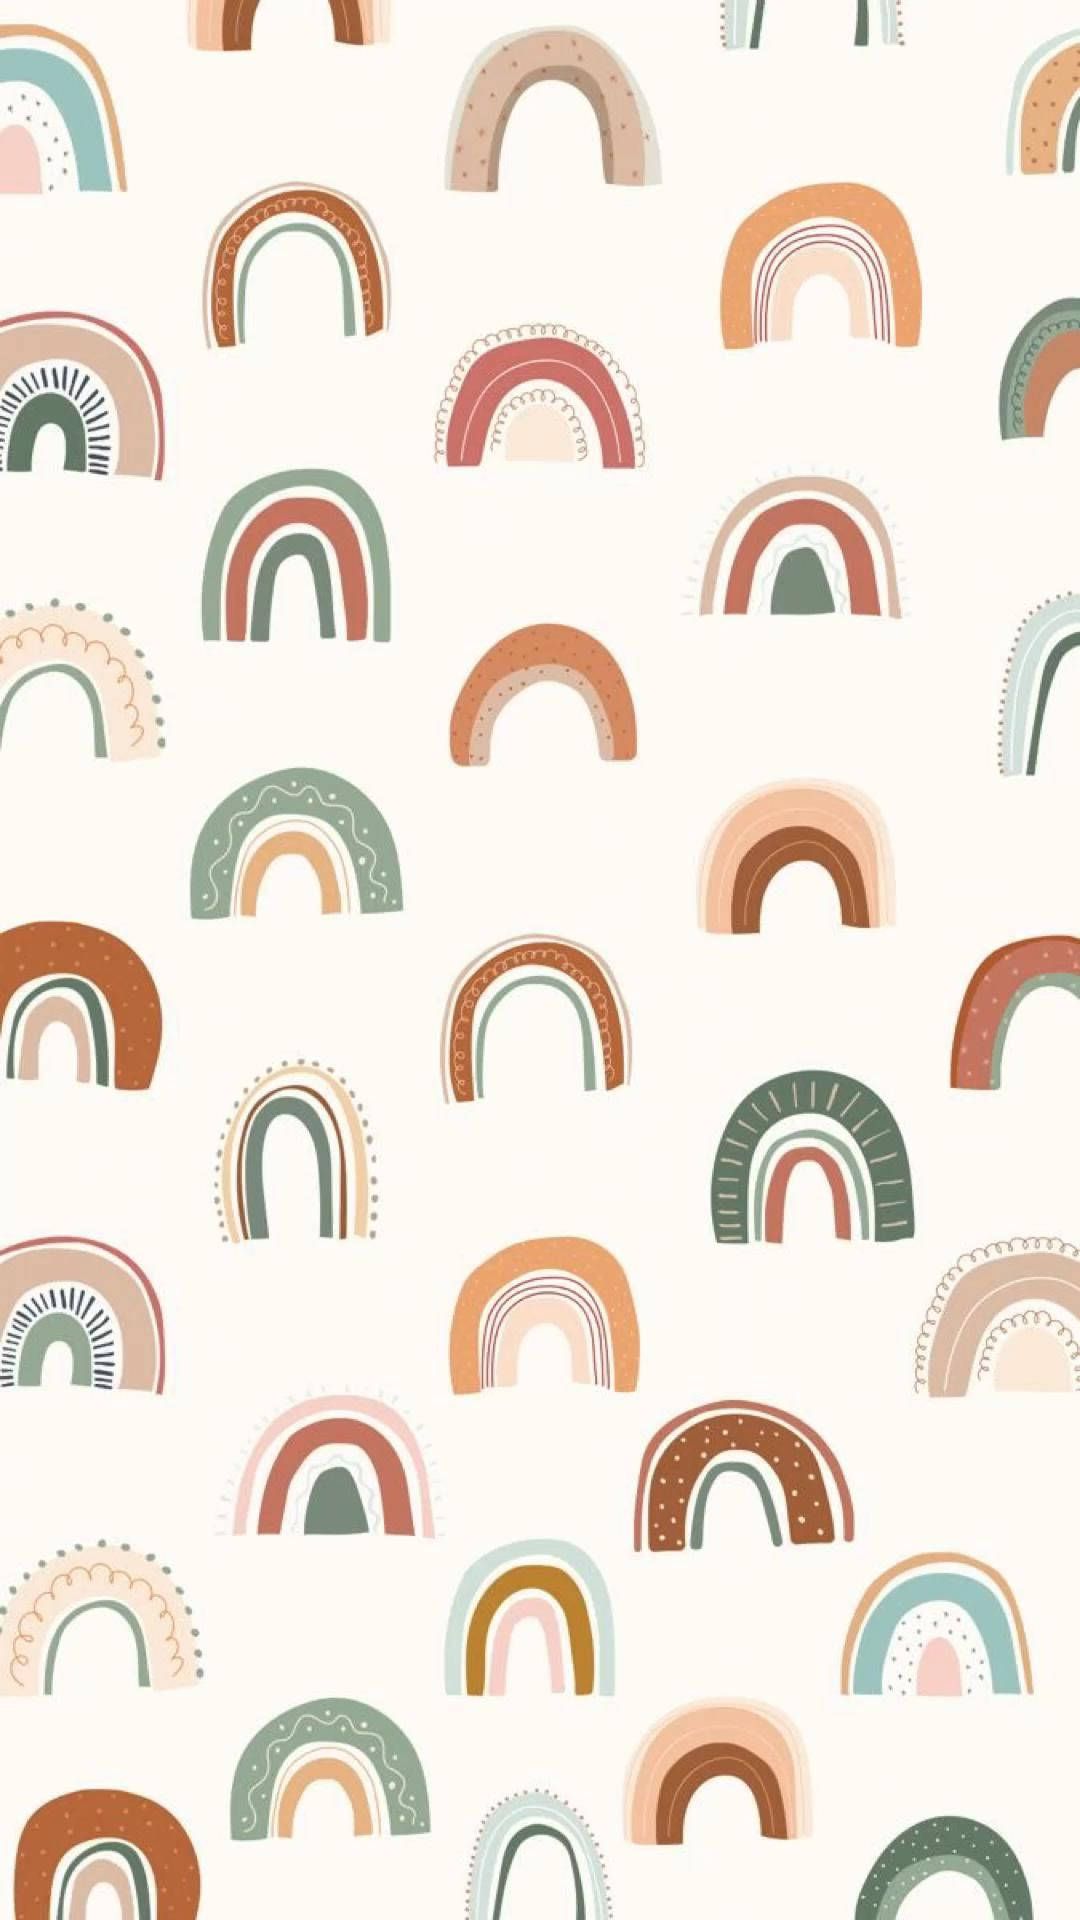 IPhone wallpaper with colorful rainbow patterns on a white background - Boho